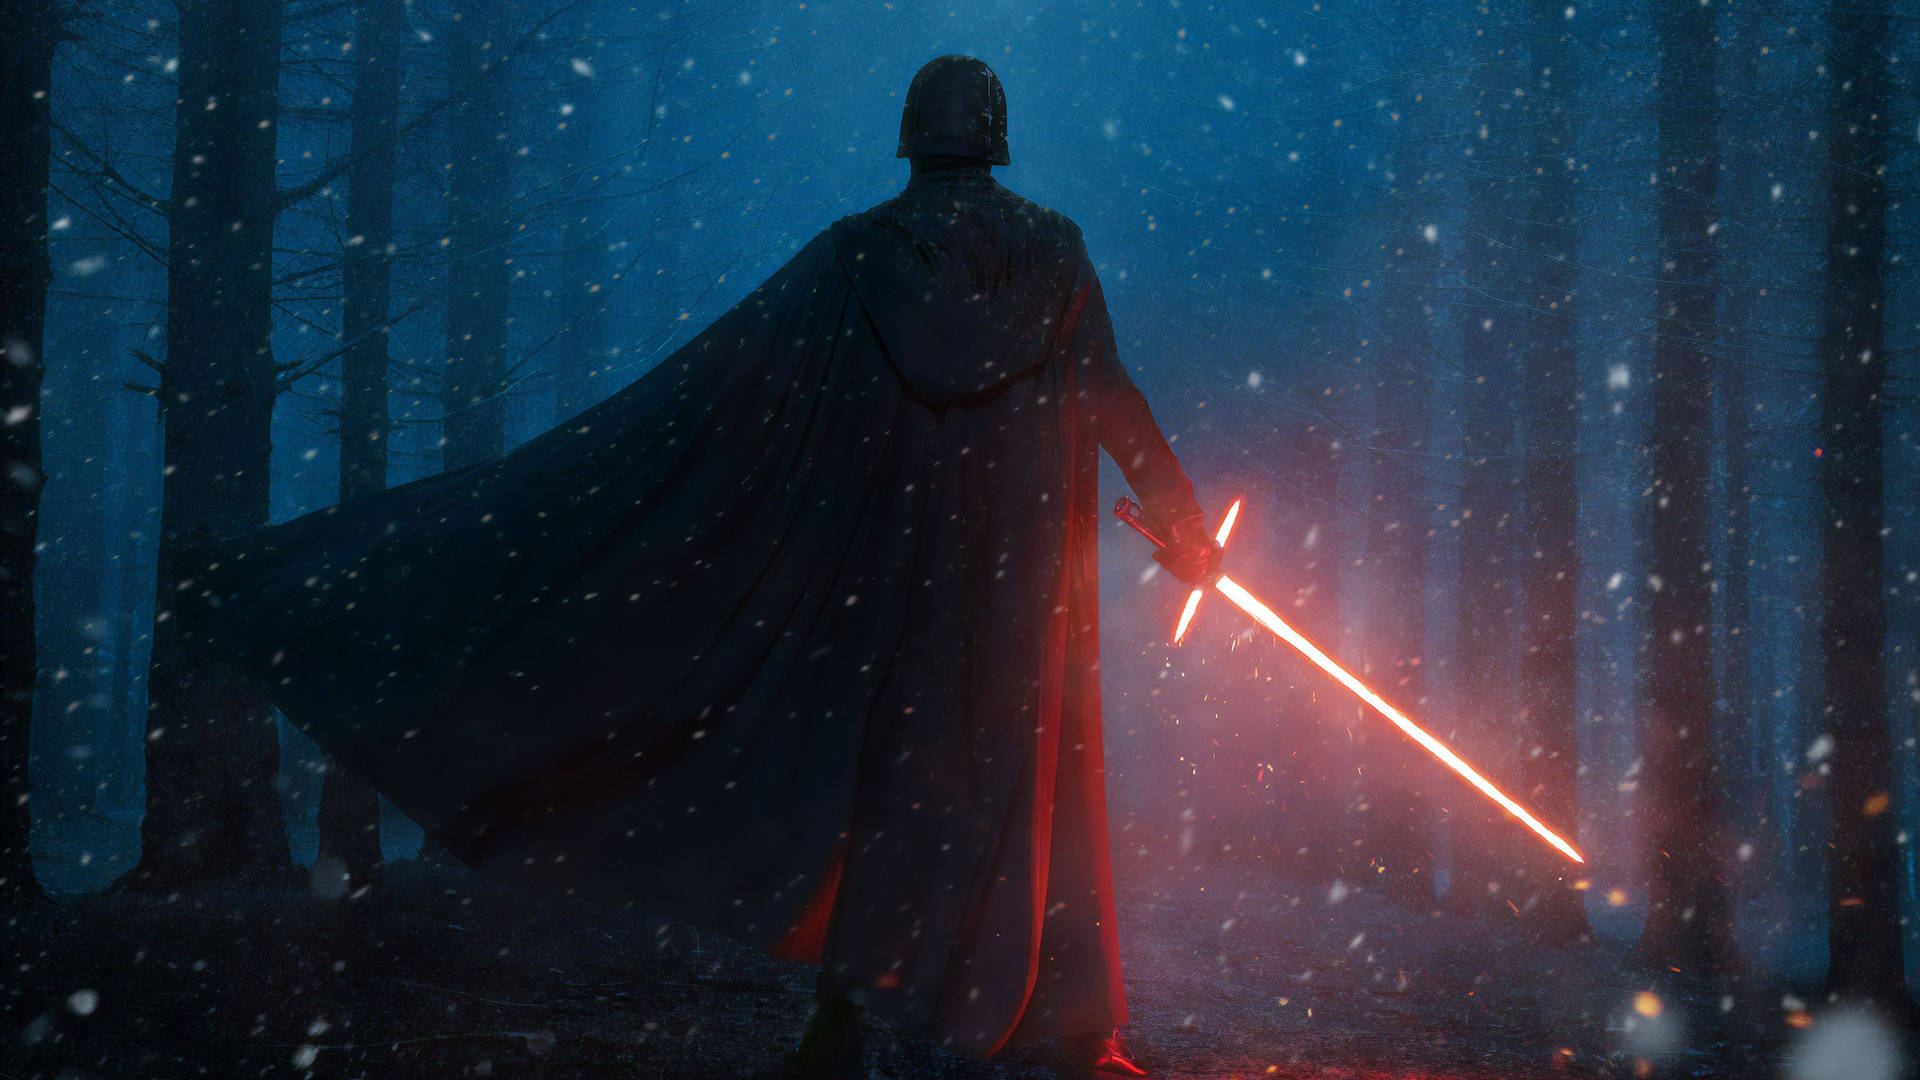 Kylo Ren stands in the forest, awaiting his destiny. Wallpaper